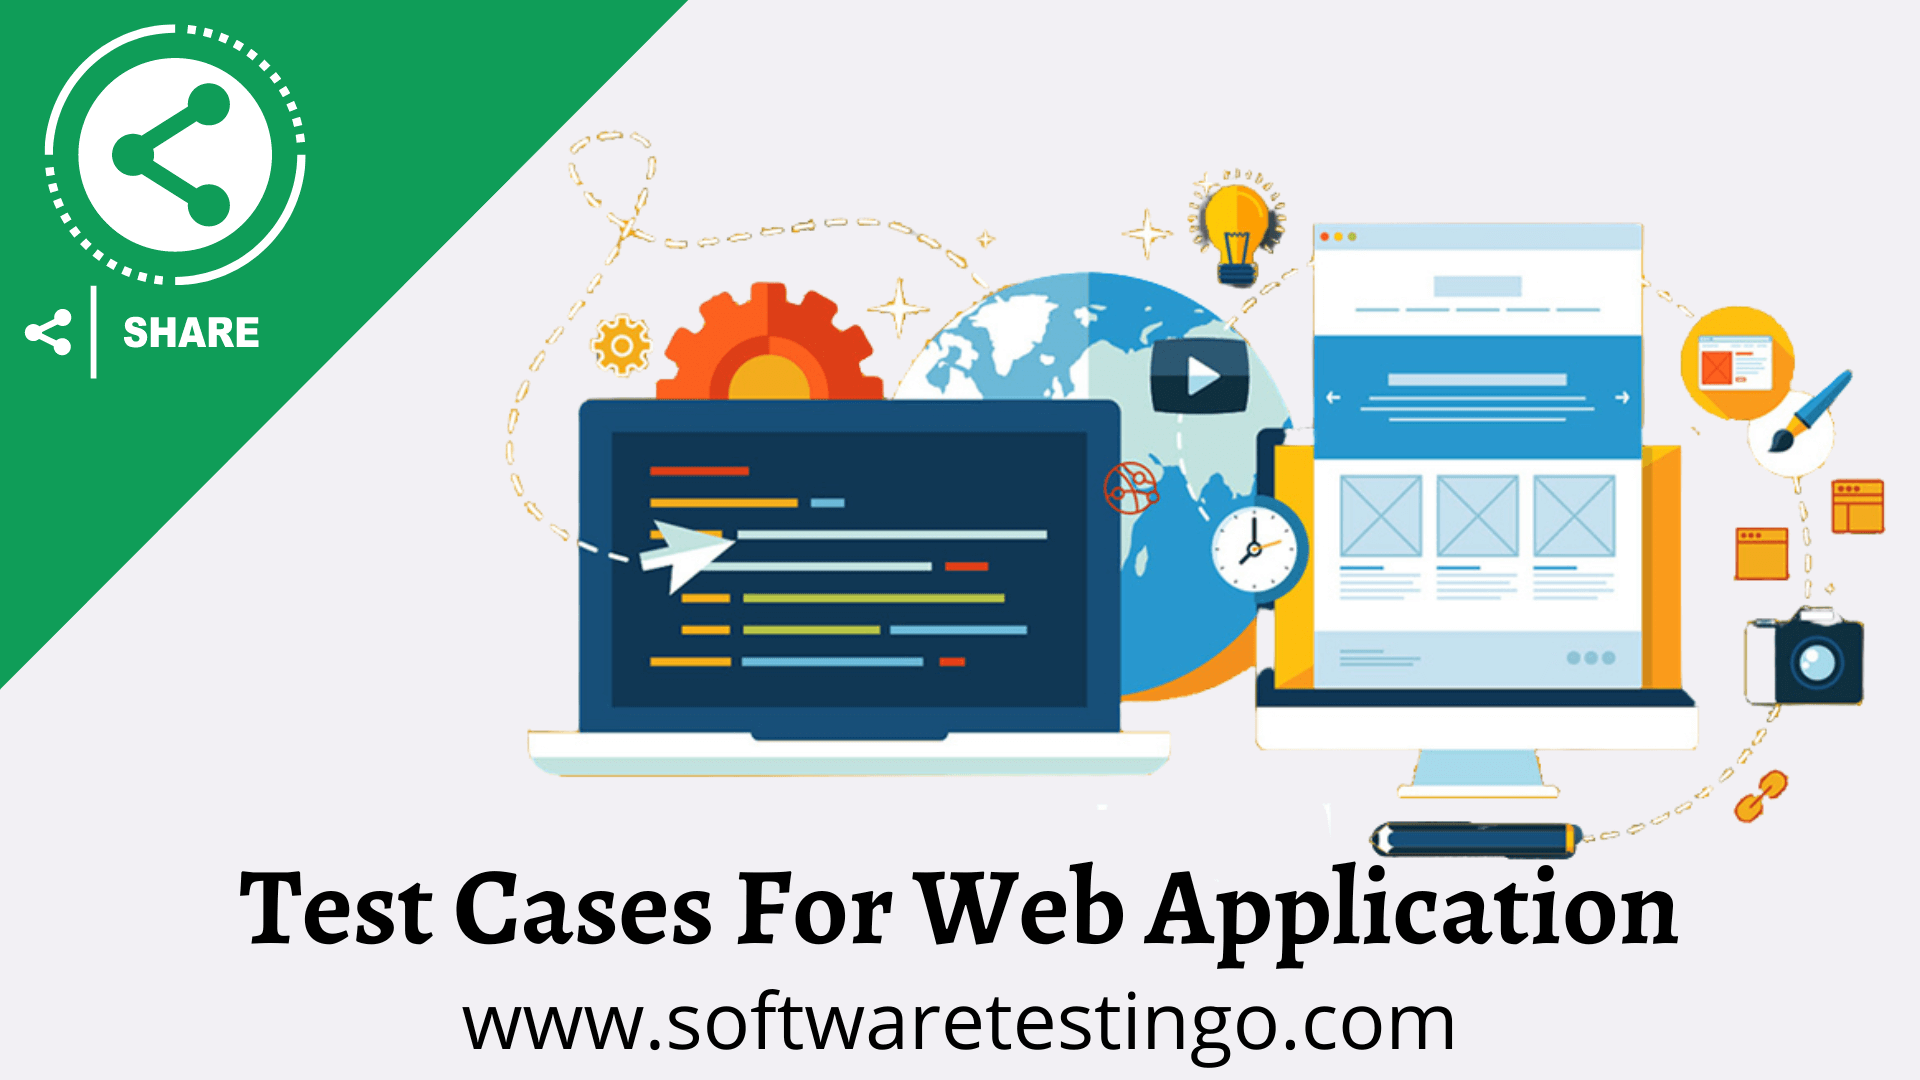 Test Cases For Web Application